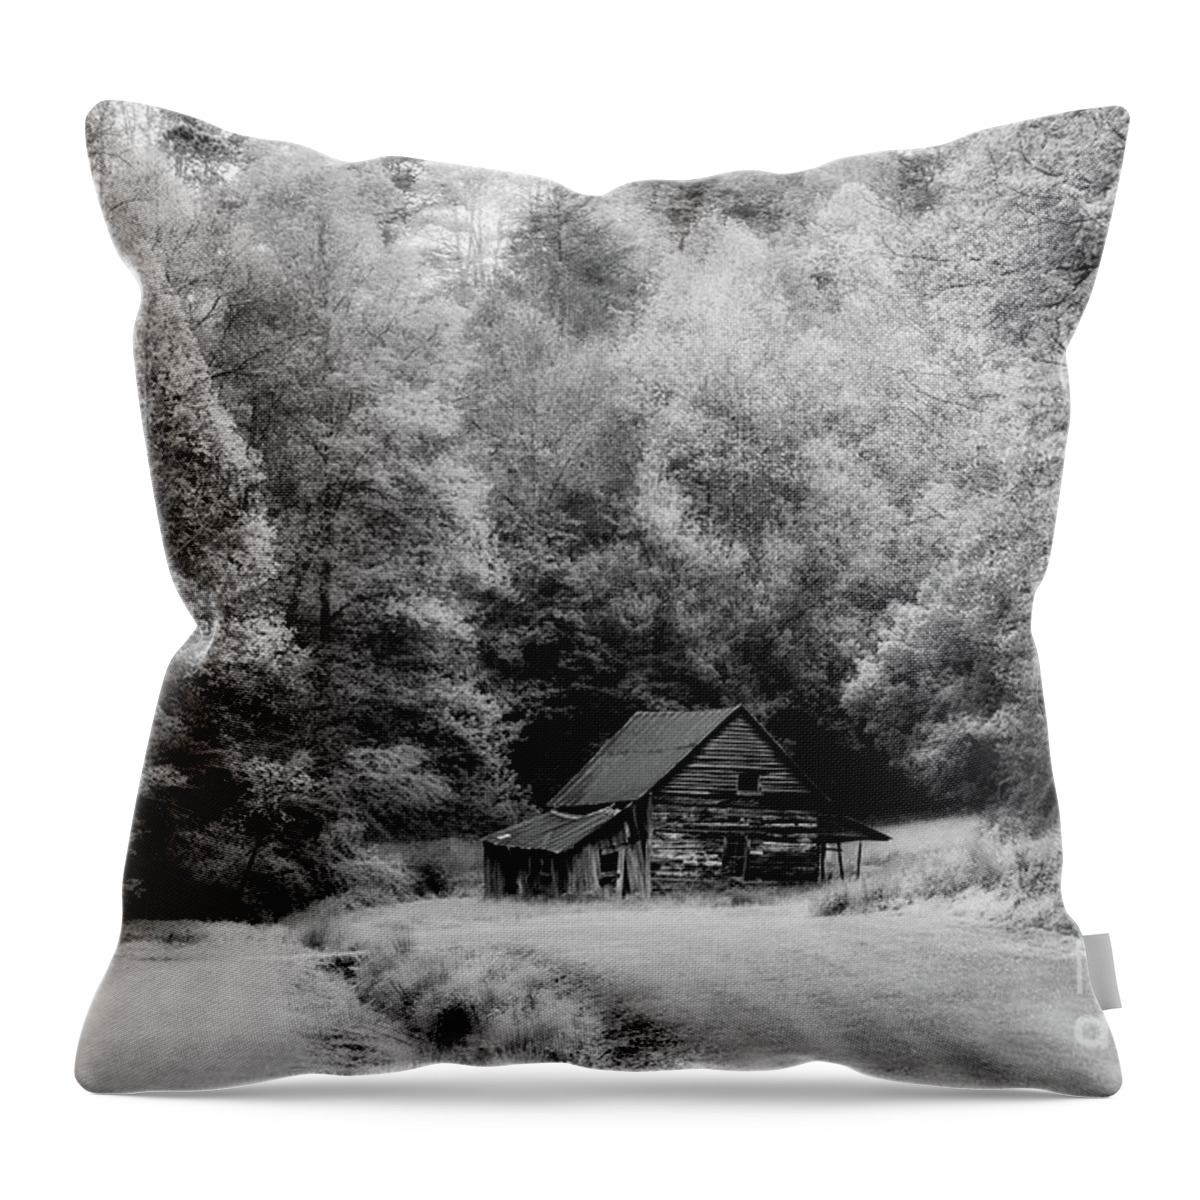 Building Throw Pillow featuring the photograph The Old Homestead #1 by Nicki McManus